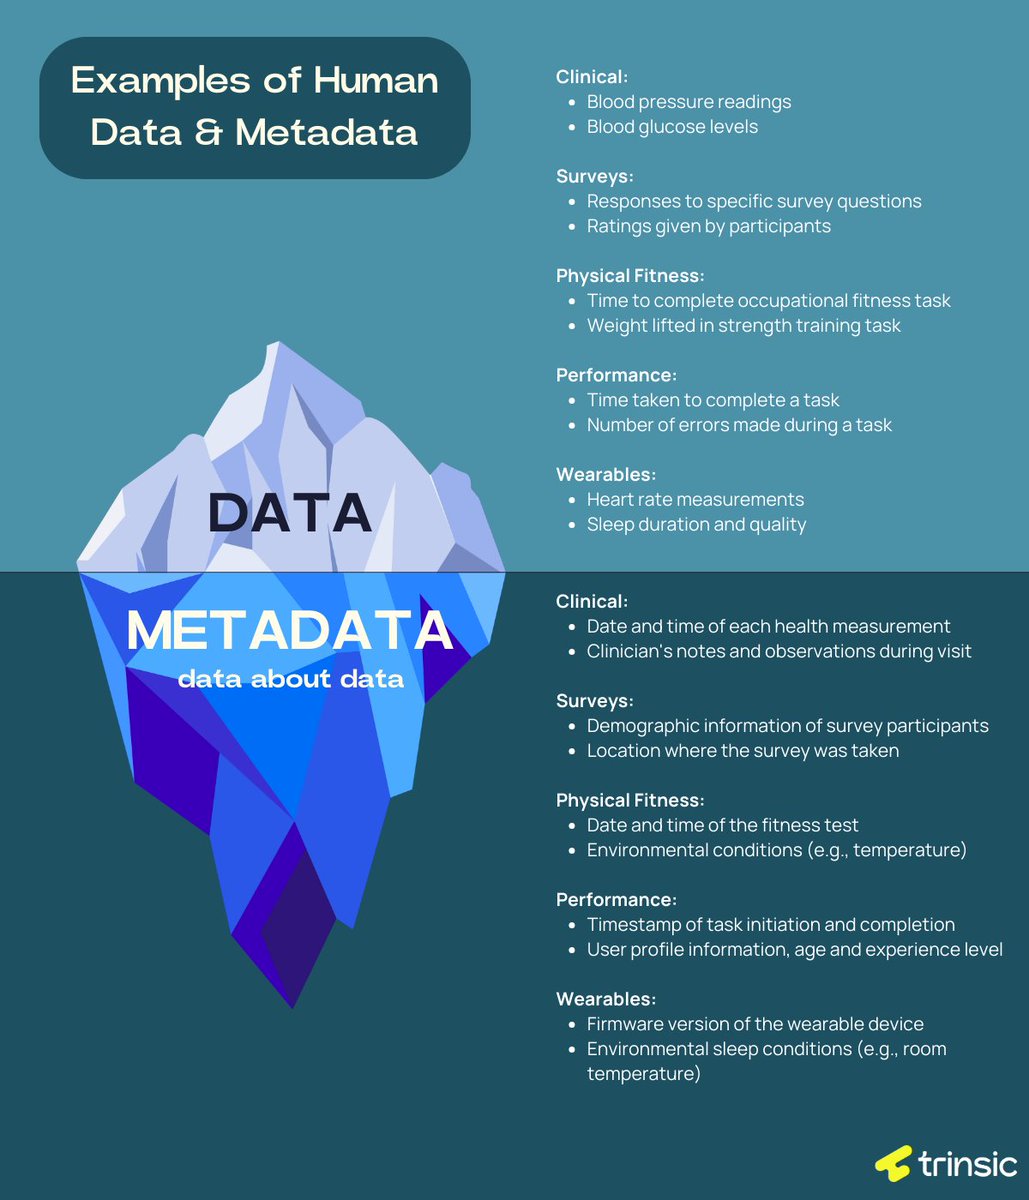 Metadata isn’t a complex idea, but is a critical consideration when collecting and analyzing real-world human data.

It acts as the backbone for understanding the nuances that influence data interpretation and analysis. #metadata #datastrategy #humandata
 bit.ly/4d4wzGV